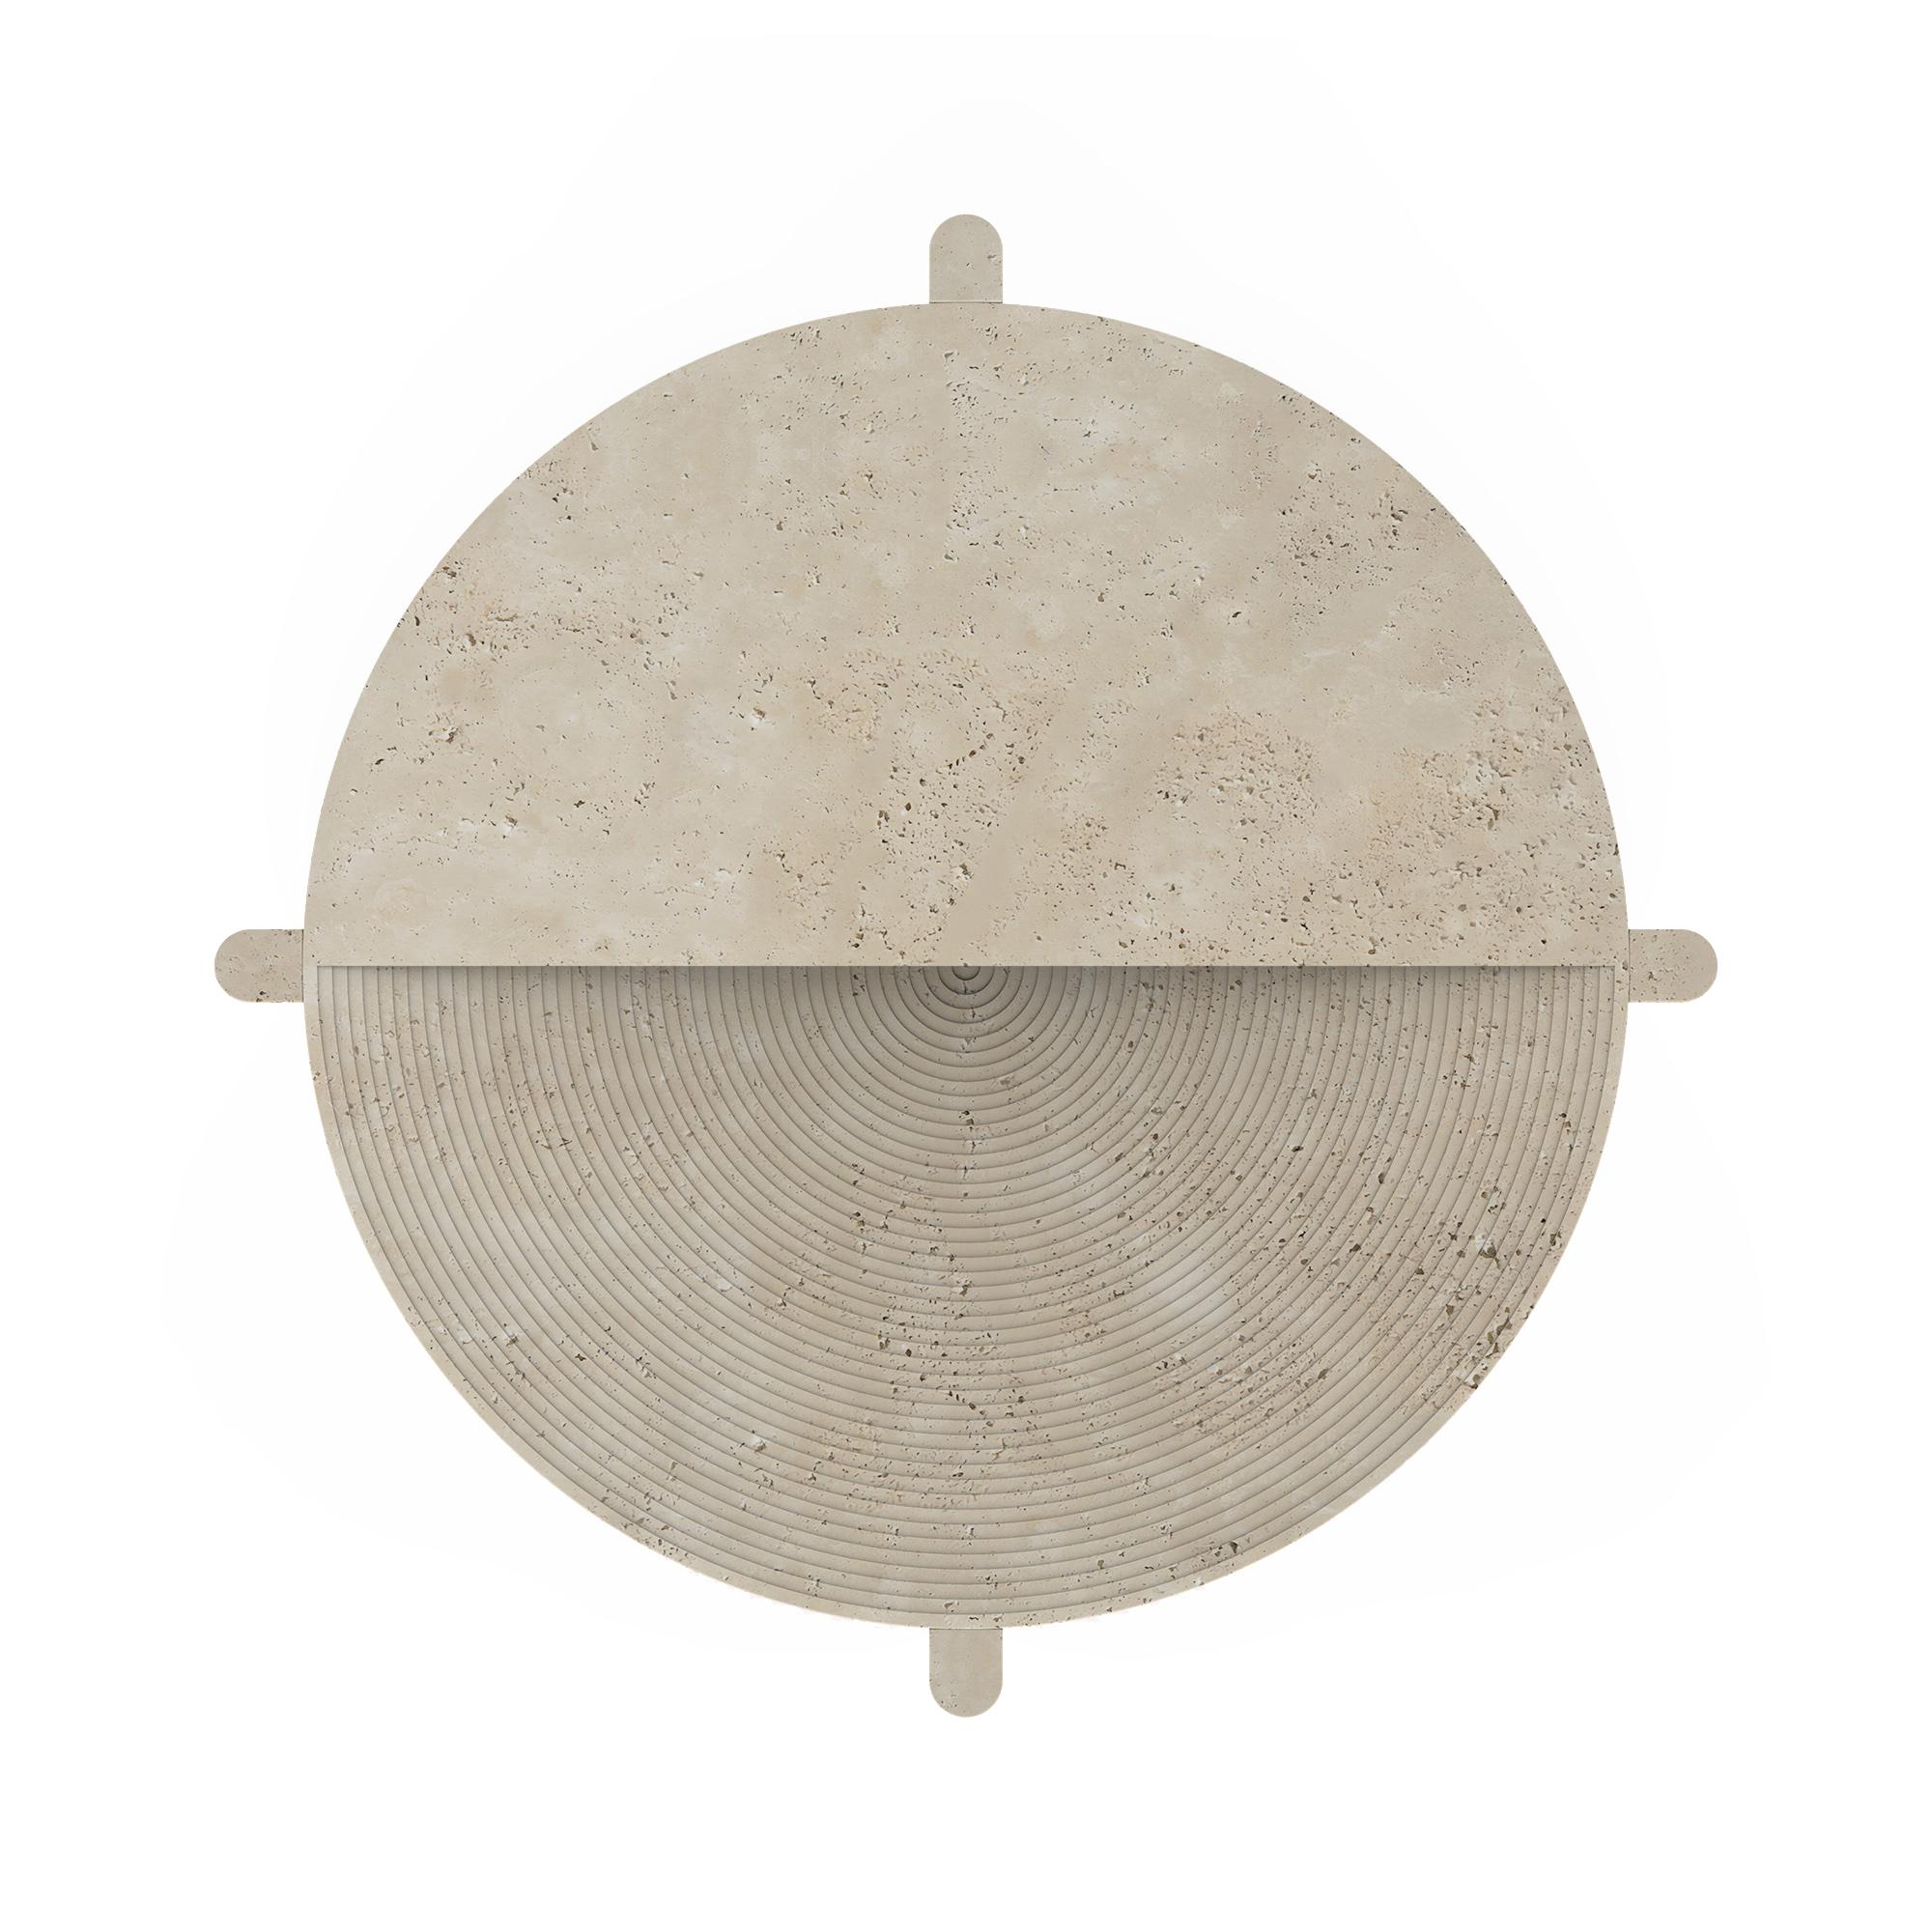 Arkhe No 1 Coffee Table Travertine, Modern Sculptural Round by Fulden Topaloglu In New Condition For Sale In Istanbul, TR